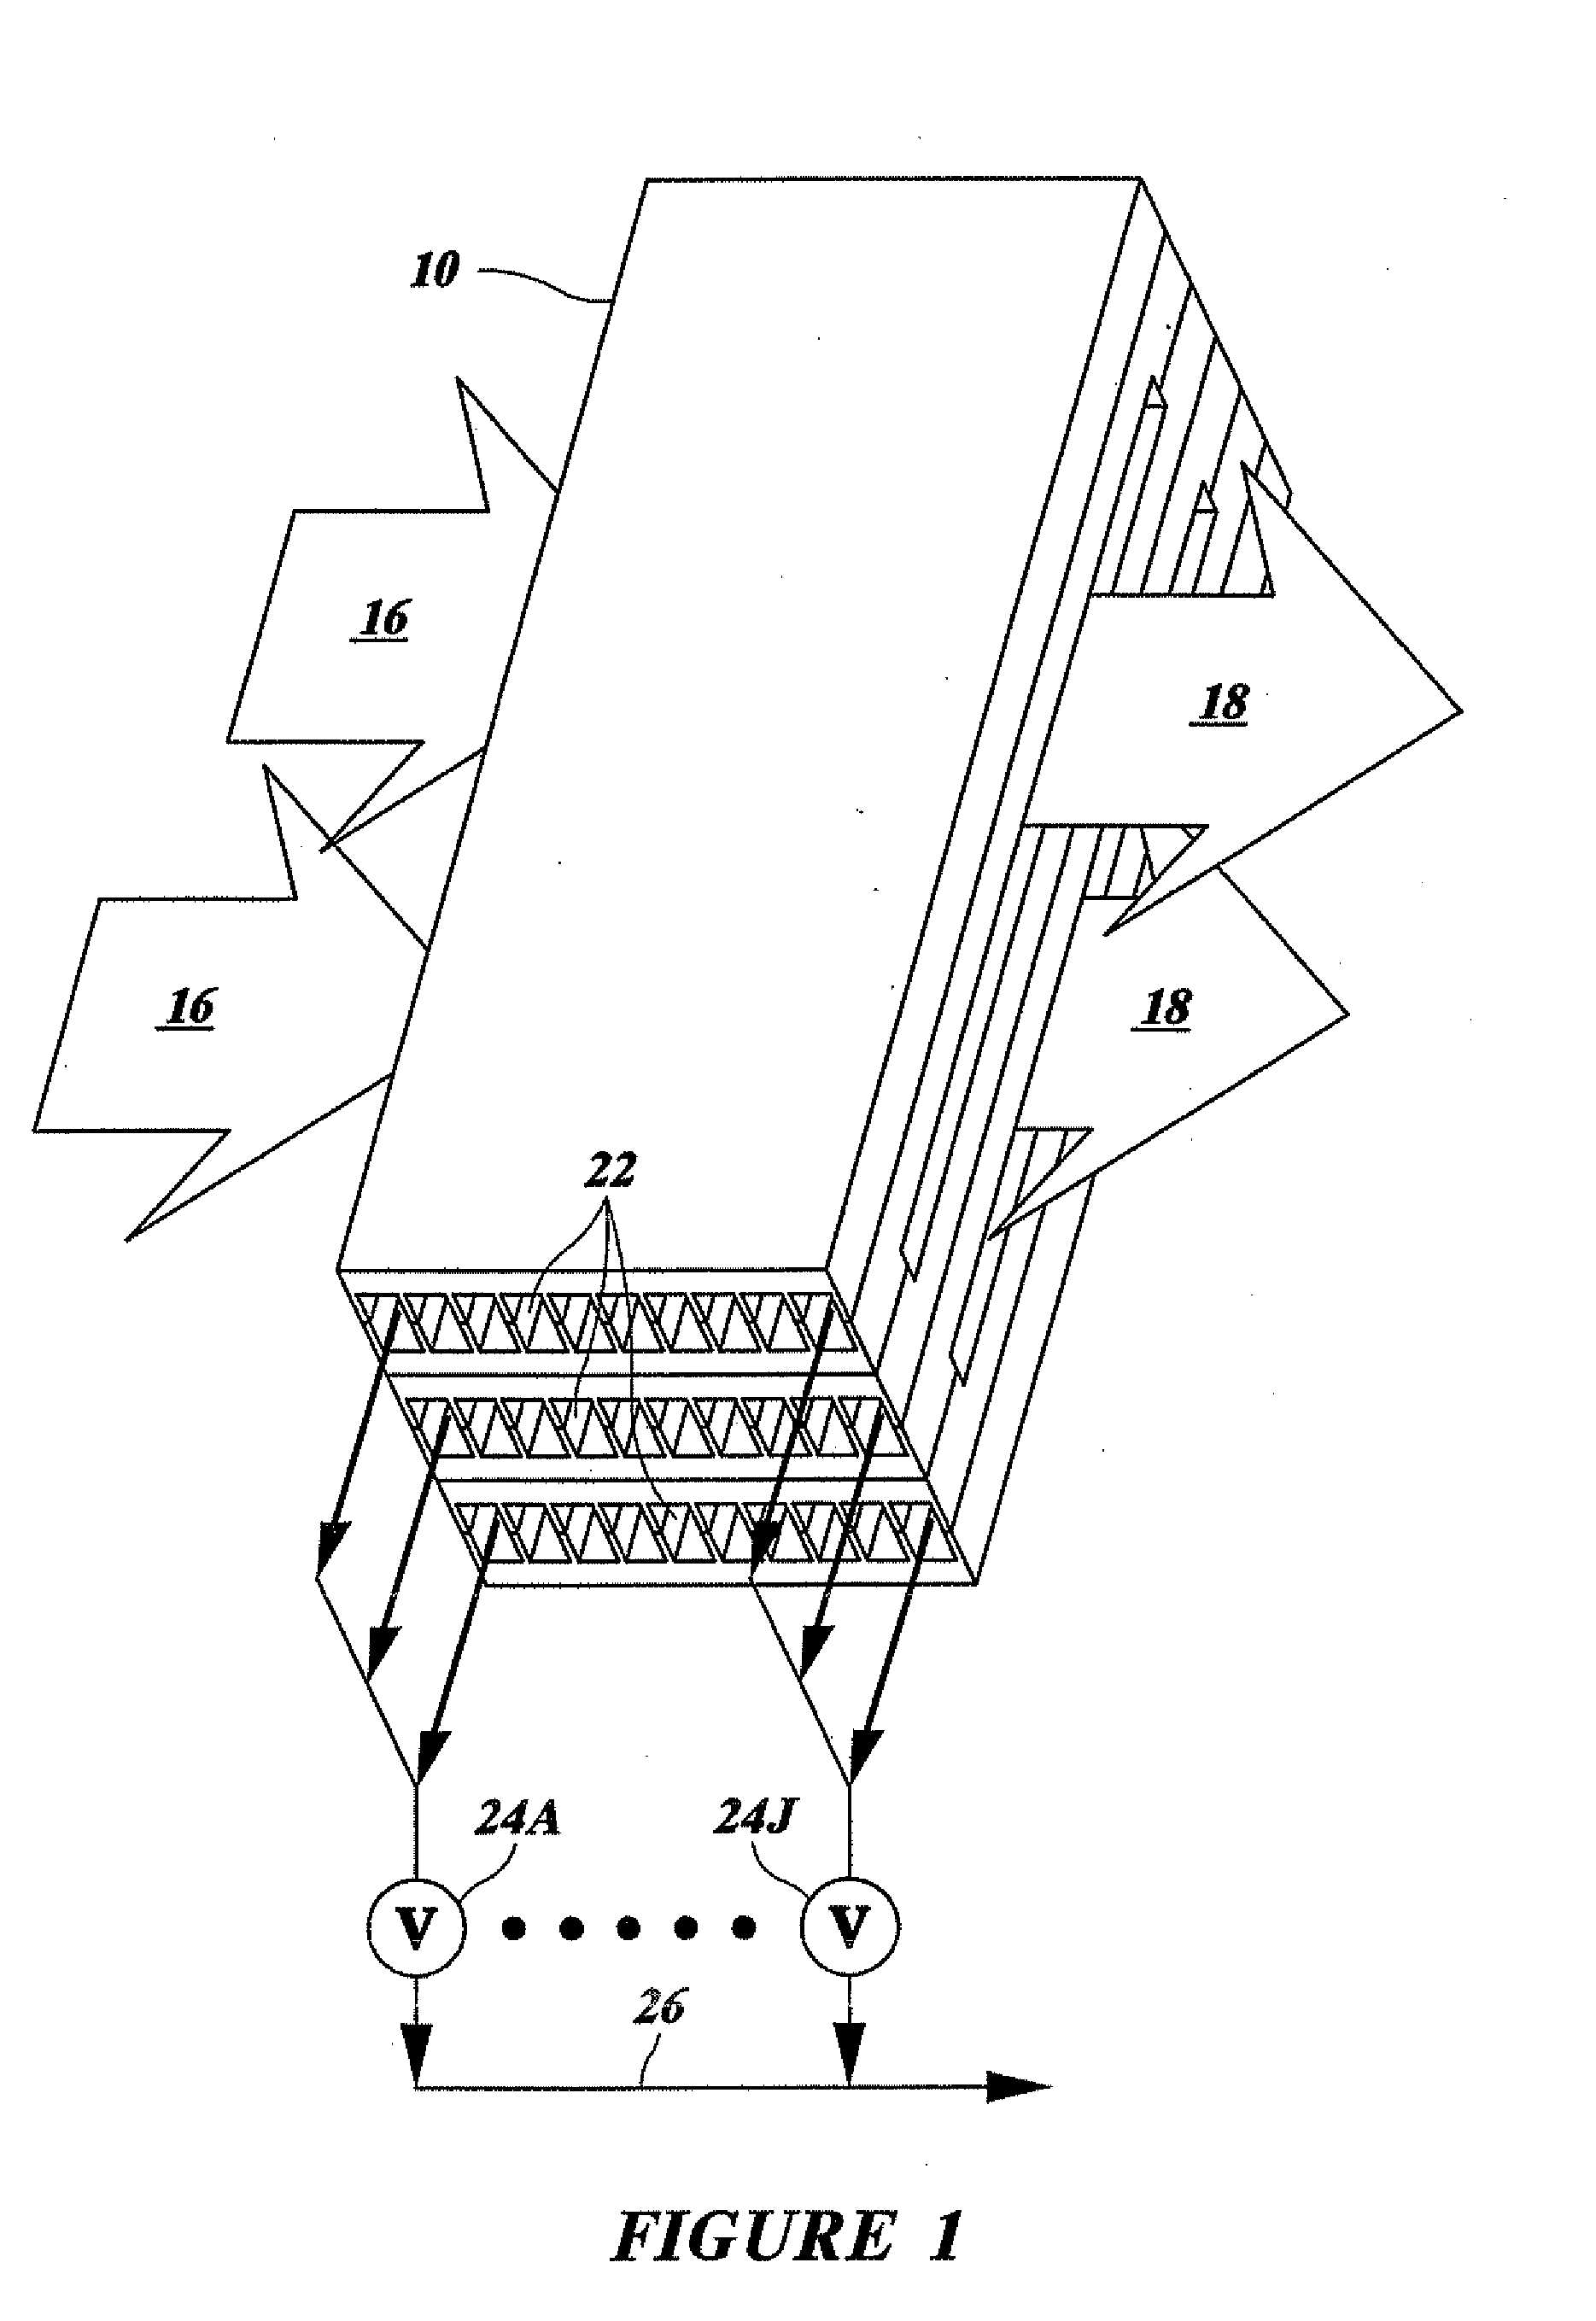 Range separation devices and processes